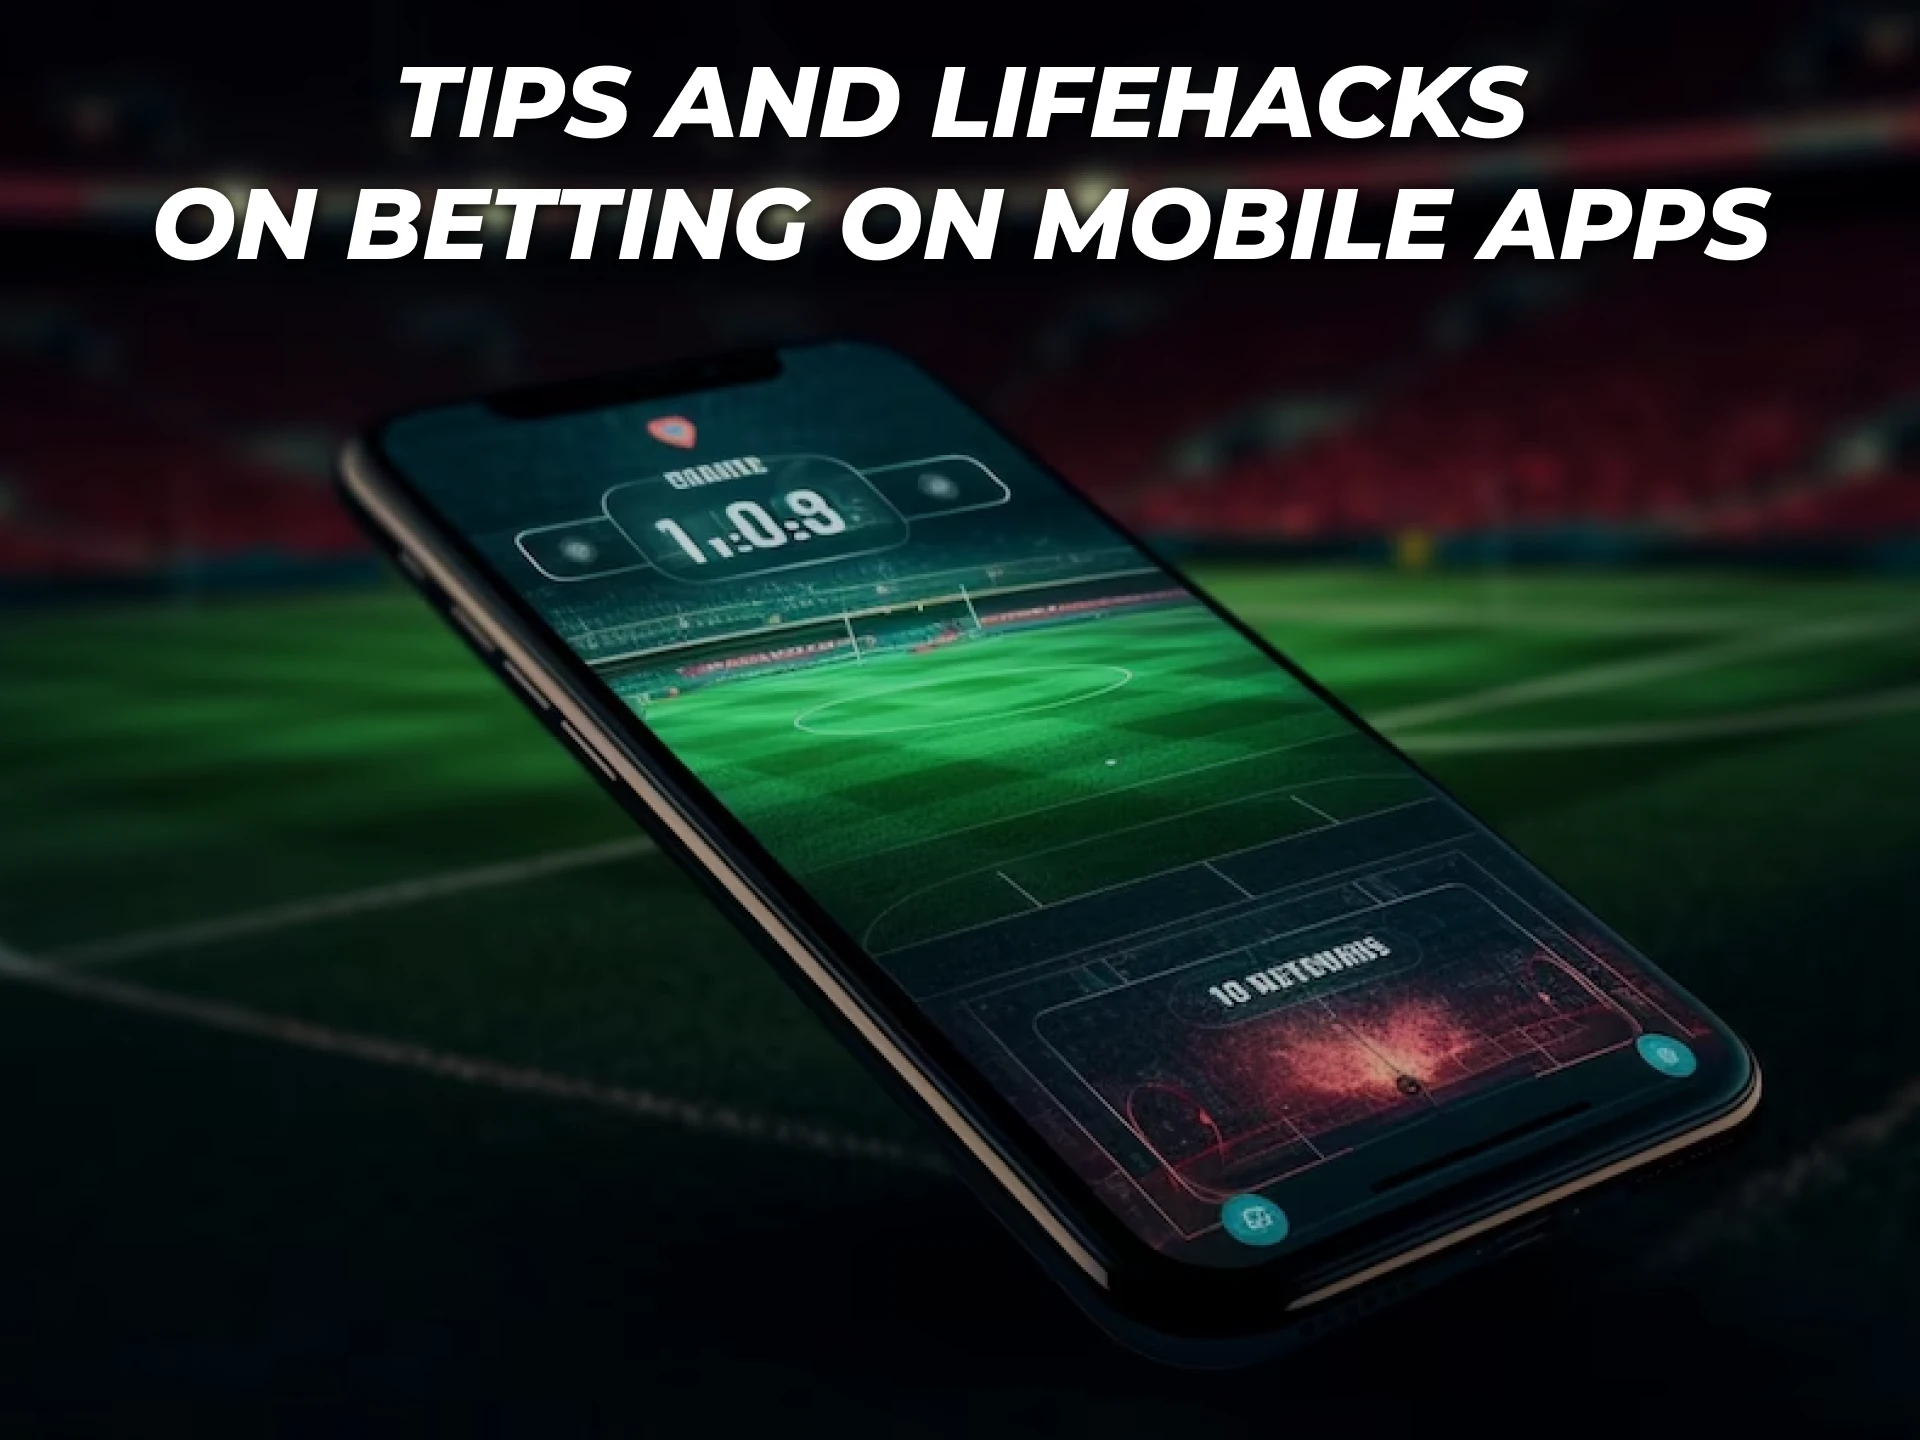 If you want to get the most out of your mobile betting, follow these tips.